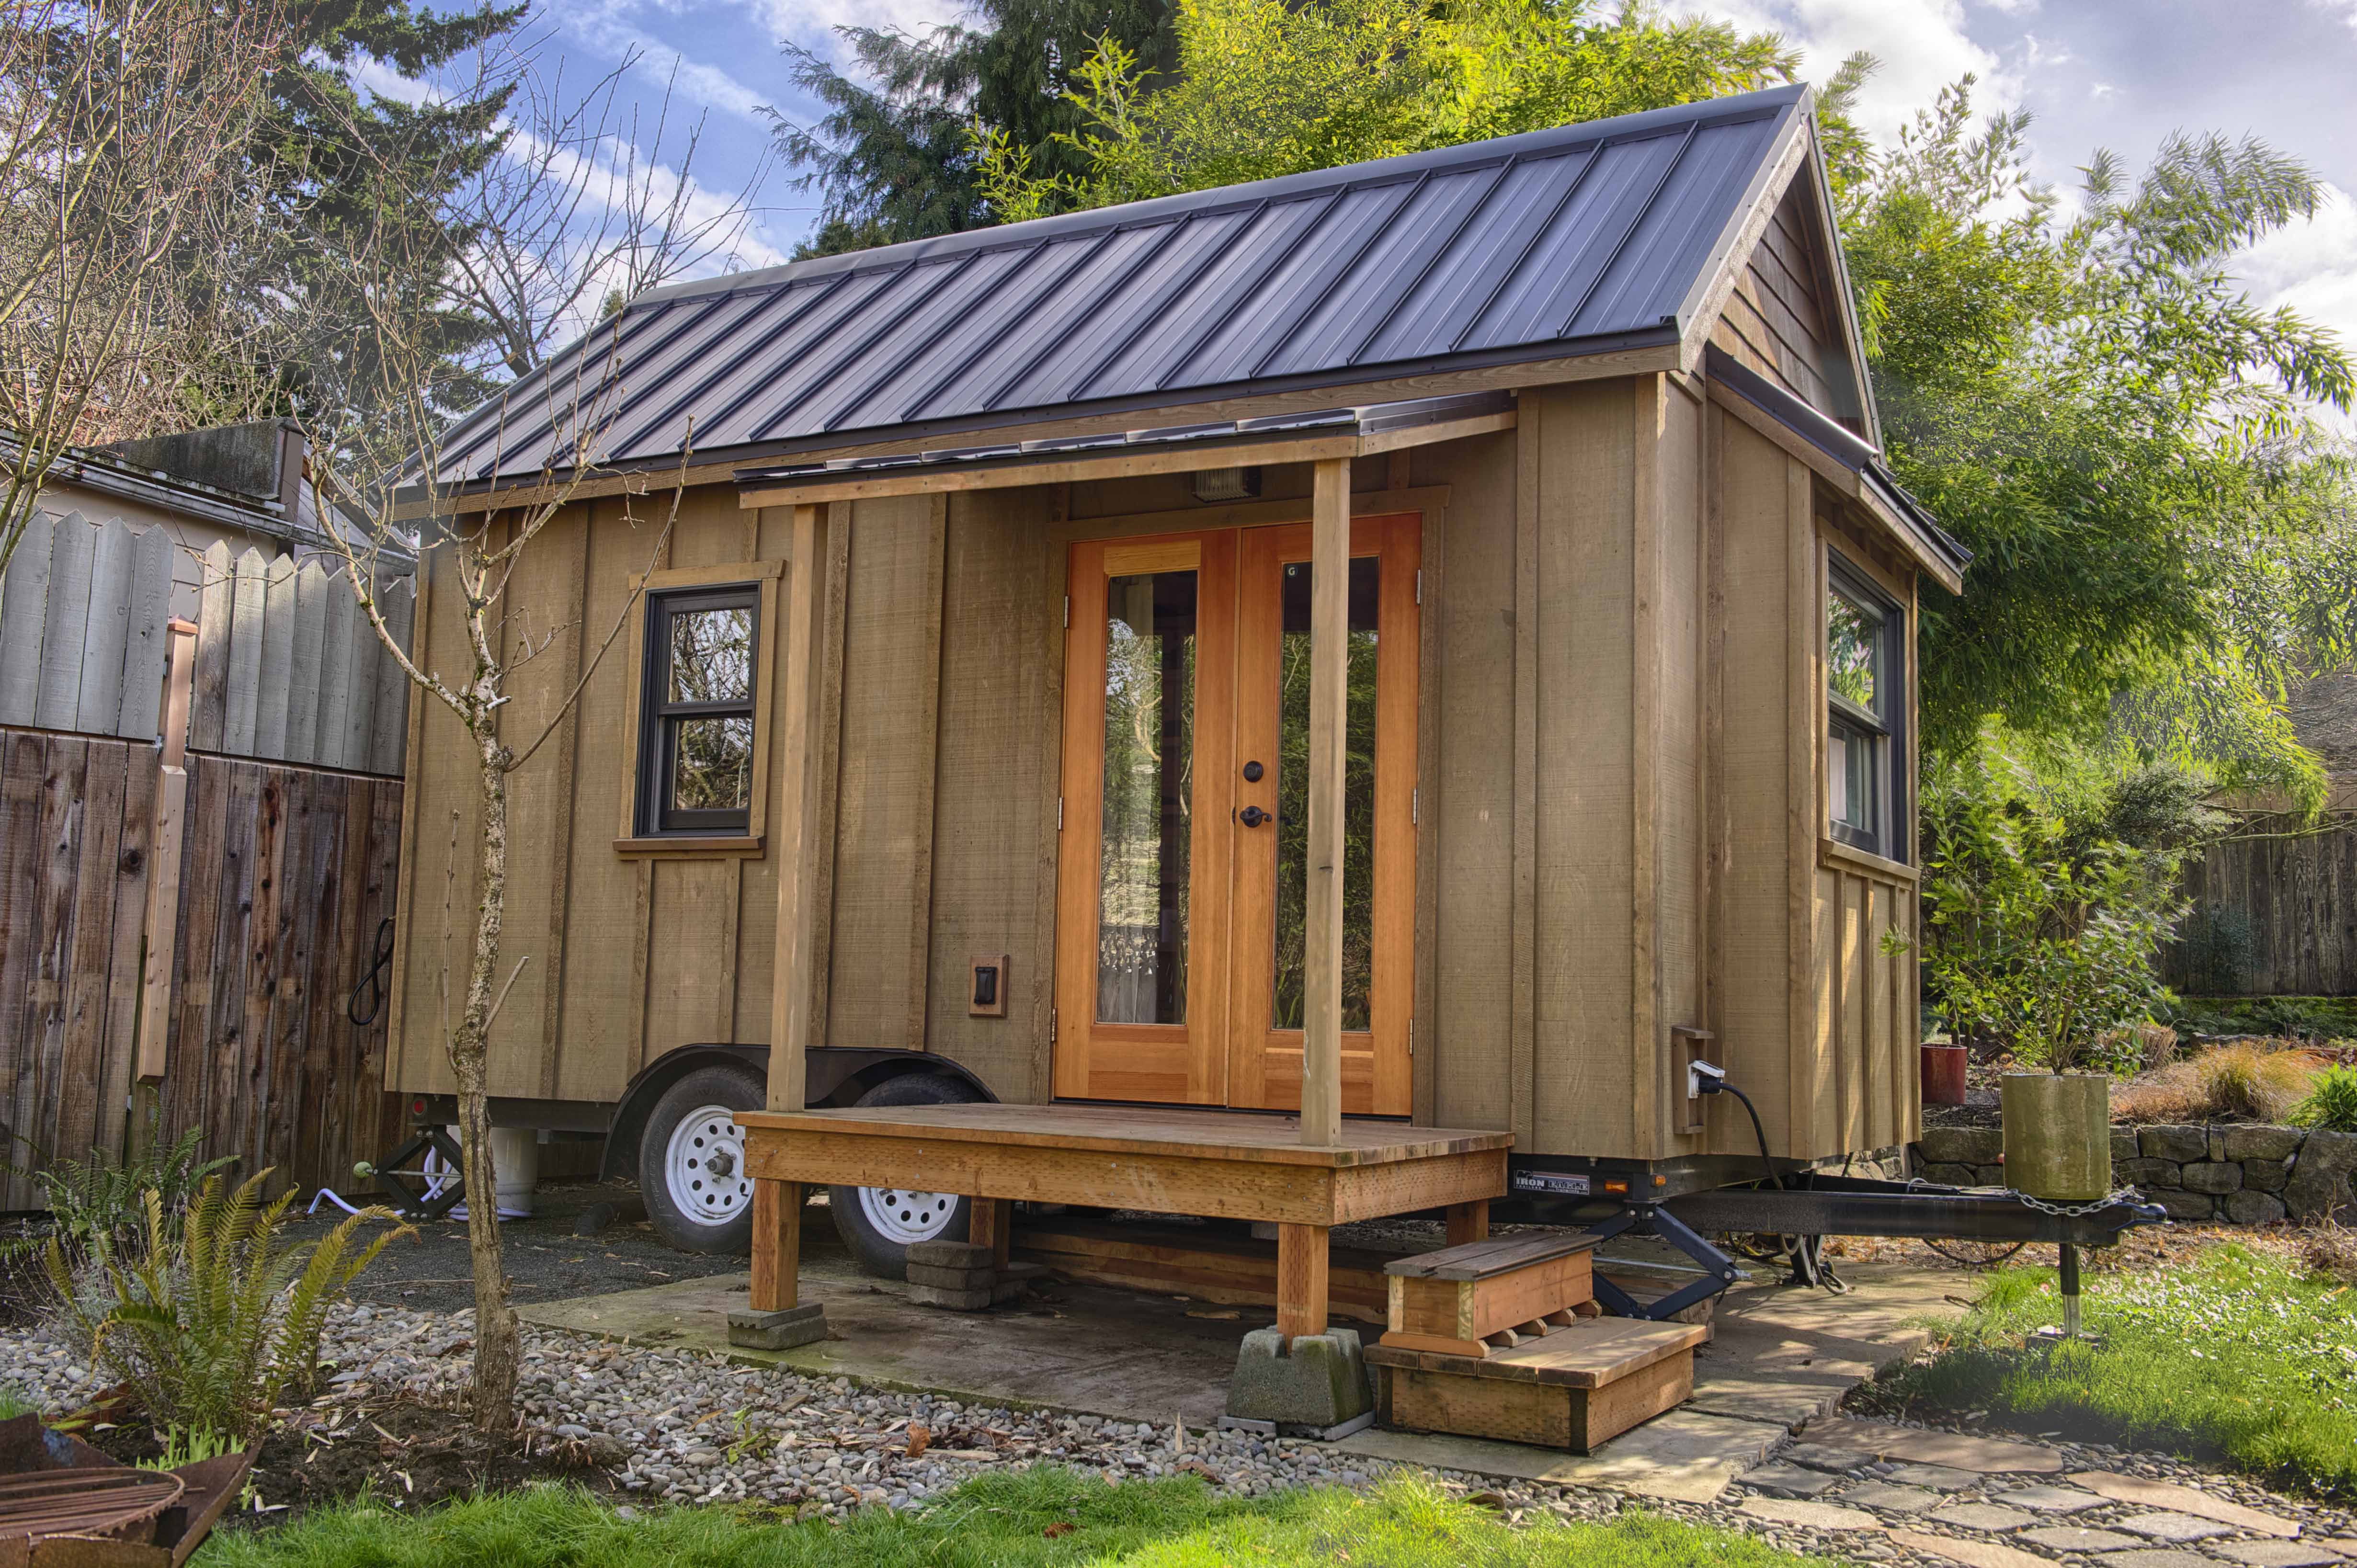 The Sweet Pea Tiny House Plans - PADtinyhouses.com